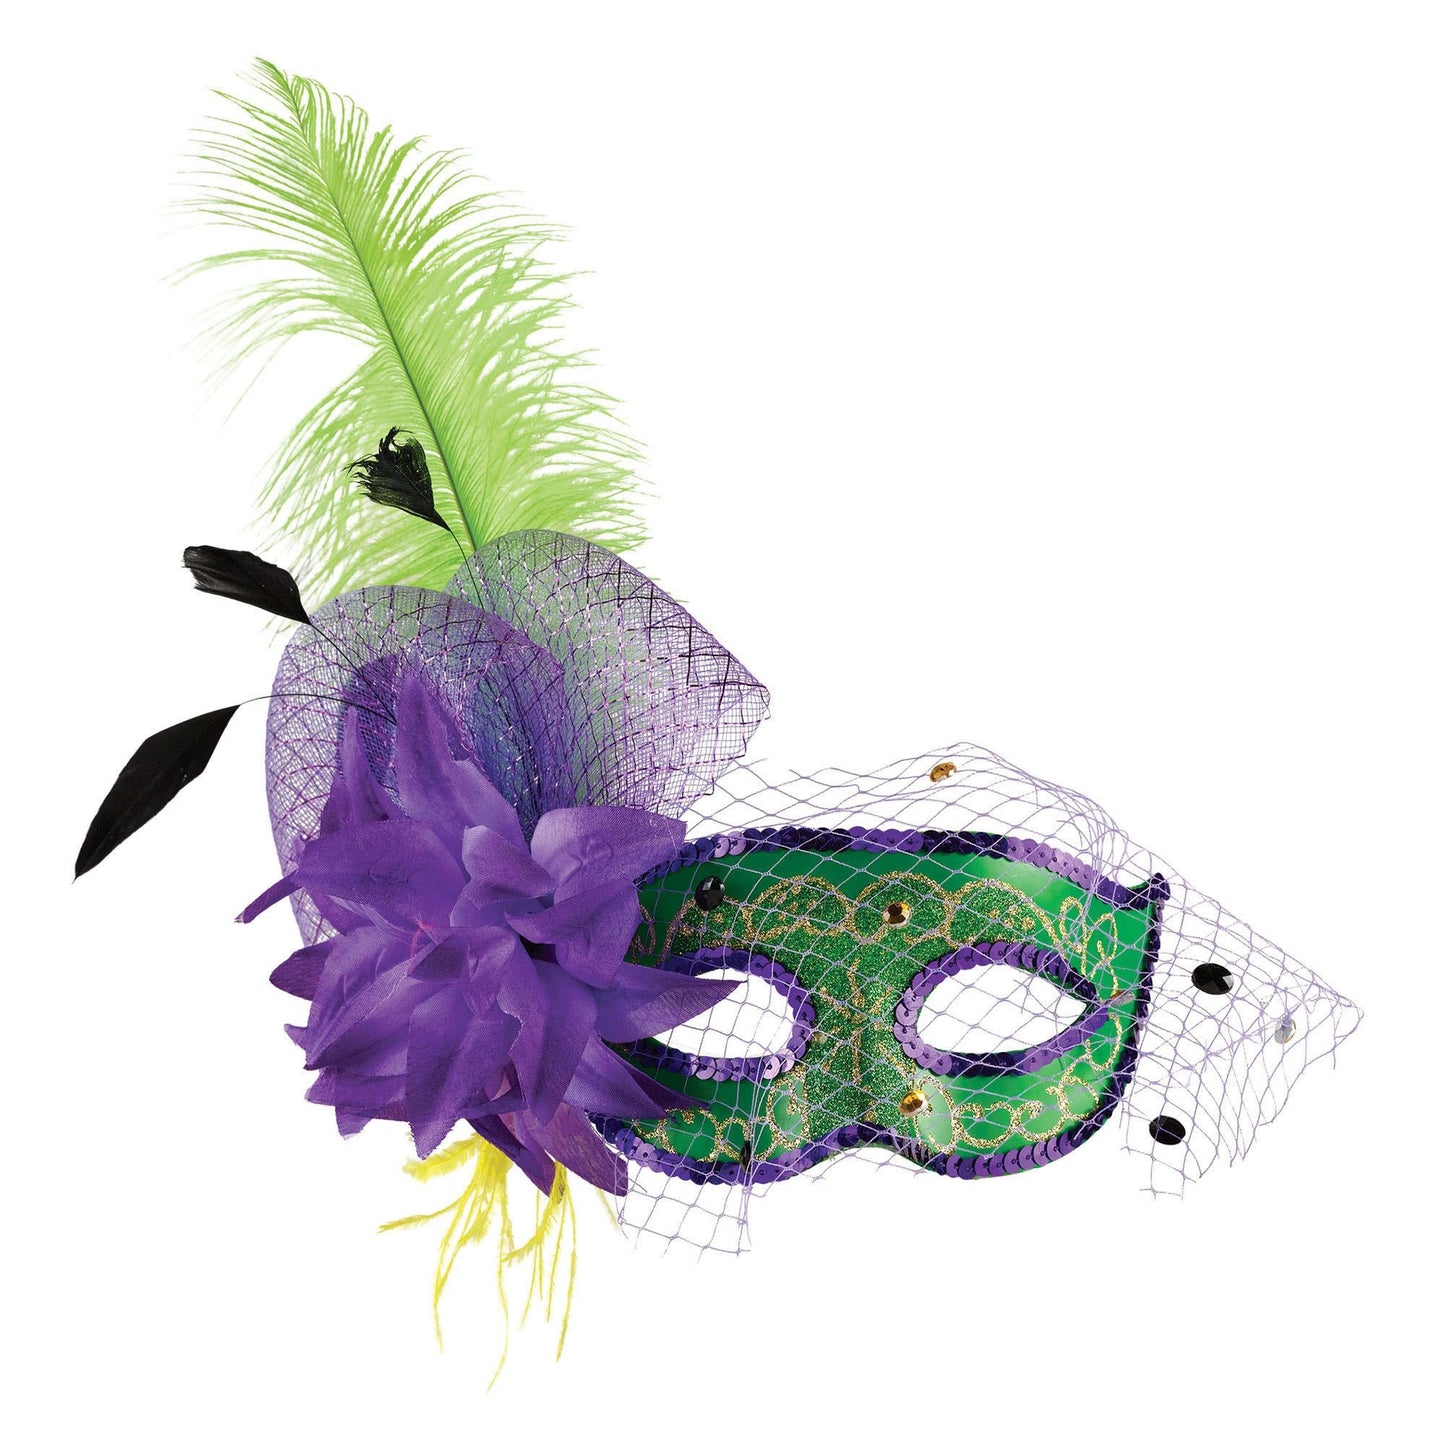 A Mardi Gras themed masquerade mask with a net and Green and purple feathers.